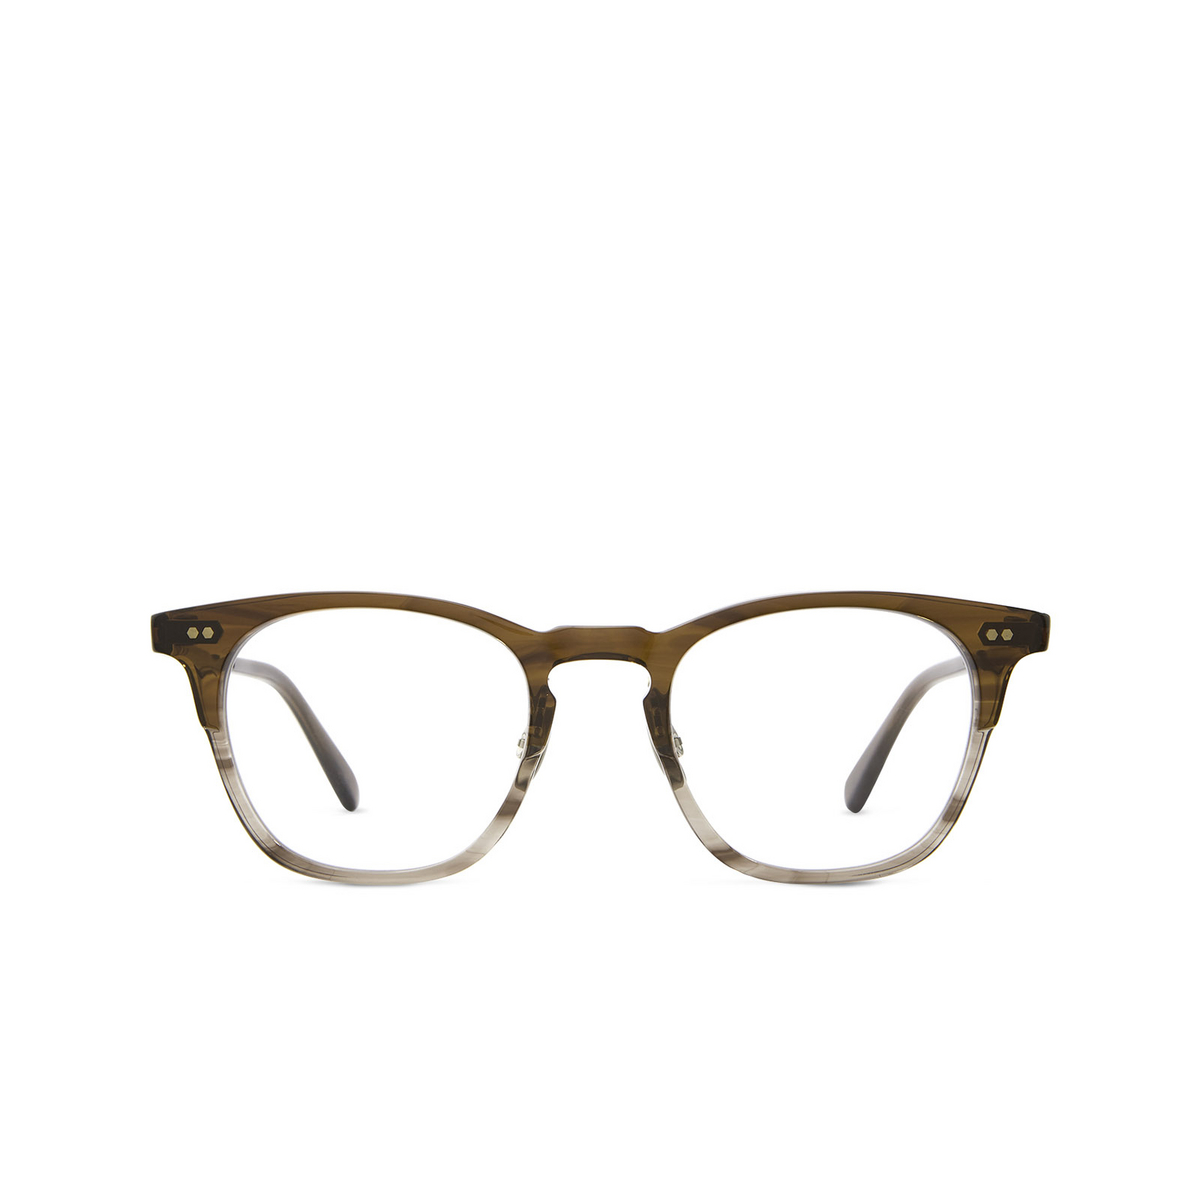 Mr. Leight WRIGHT C Eyeglasses MAF-ATGII Mahogany Fade-Antique Gold II - front view